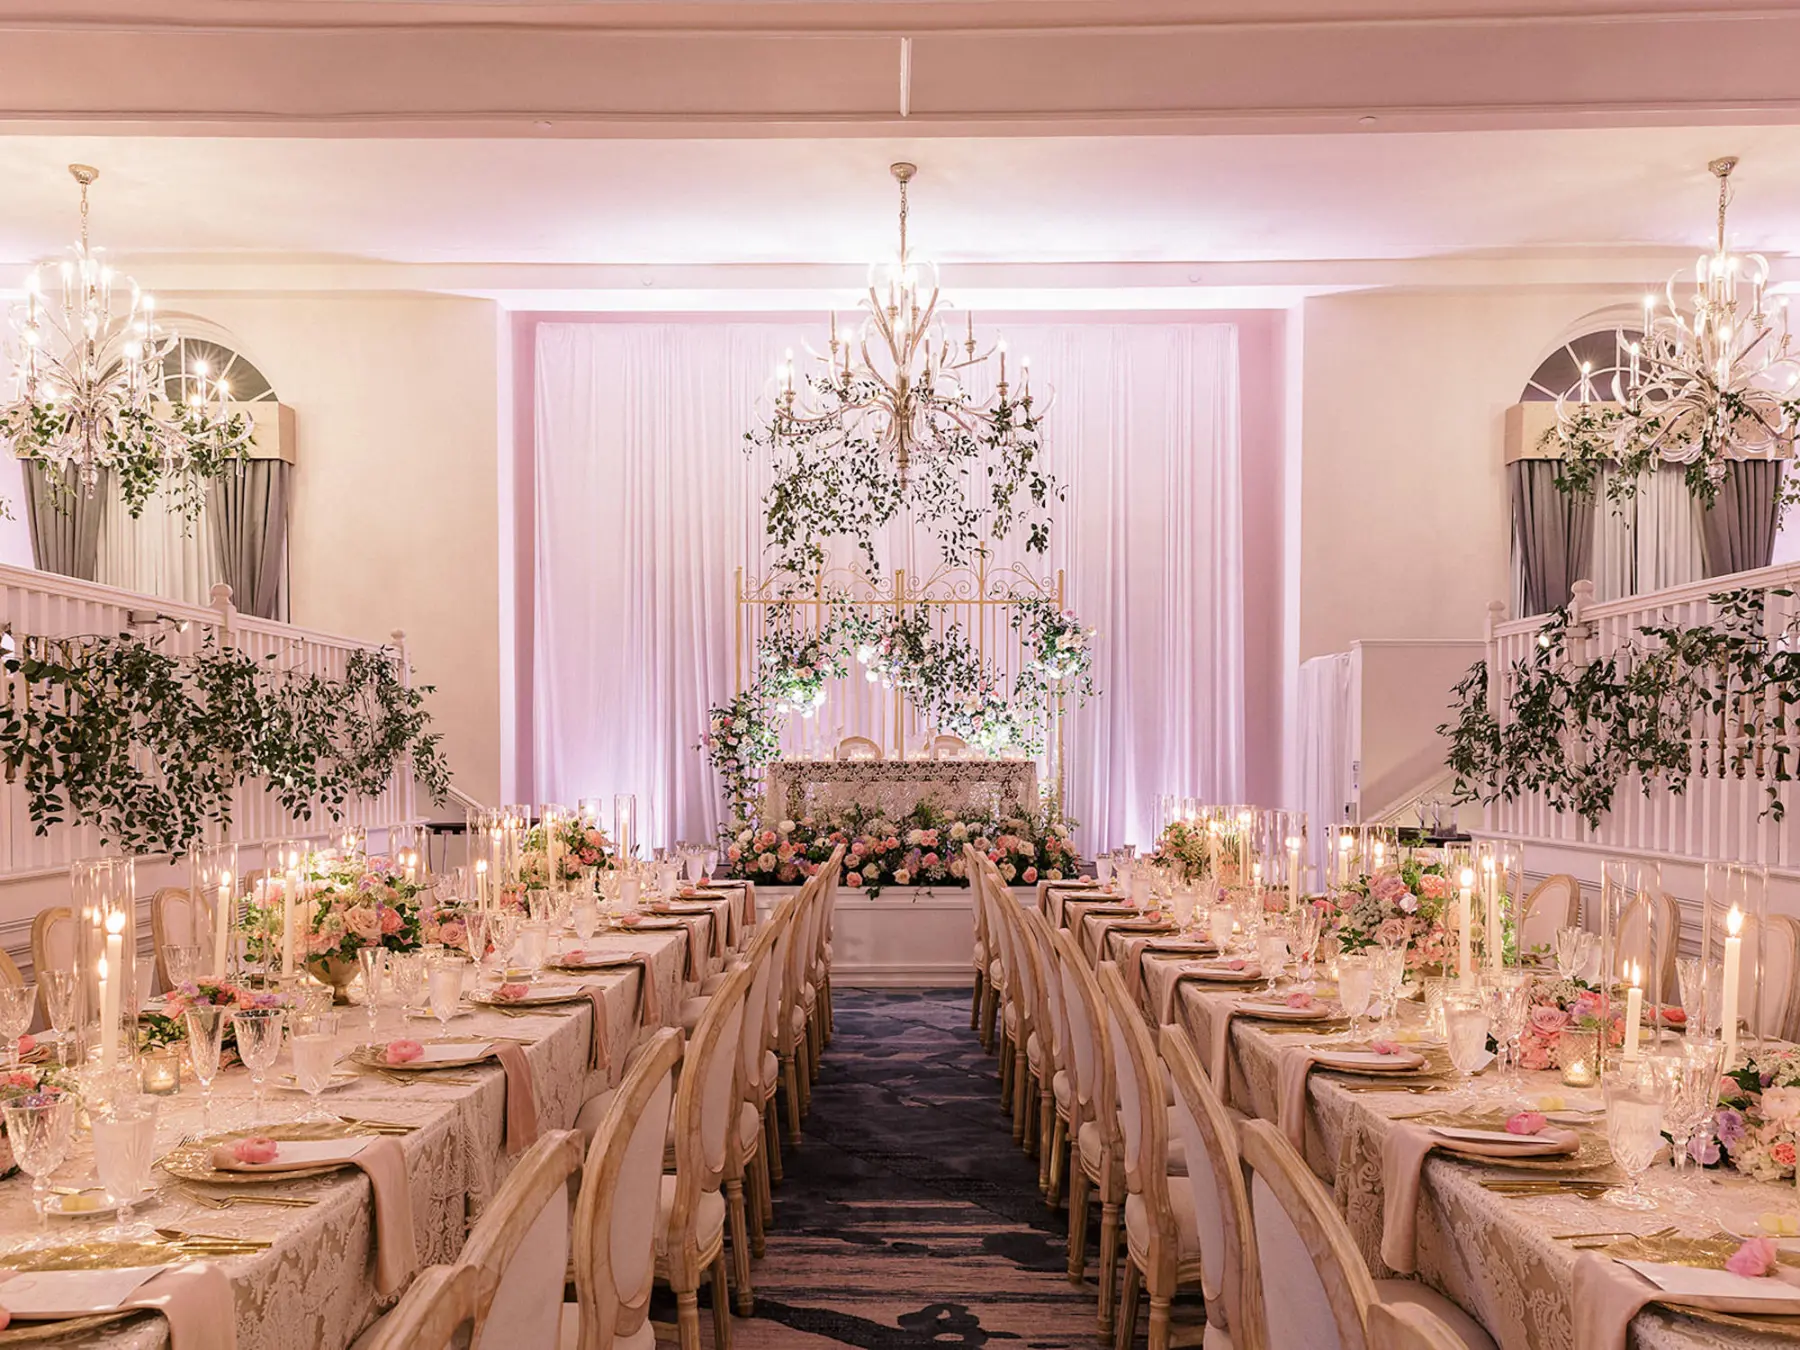 Whimsical Bridgerton Garden Ballroom Wedding Reception Inspiration | Long Feasting Tables | White Drapery Backdrop | Greenery Garland Decor Ideas | Tampa Bay Event Venue Don CeSar | St Pete Planner Unique Weddings and Events | A Chair Affair | Kate Ryan Event Rentals | Tampa Bay Staging and Events